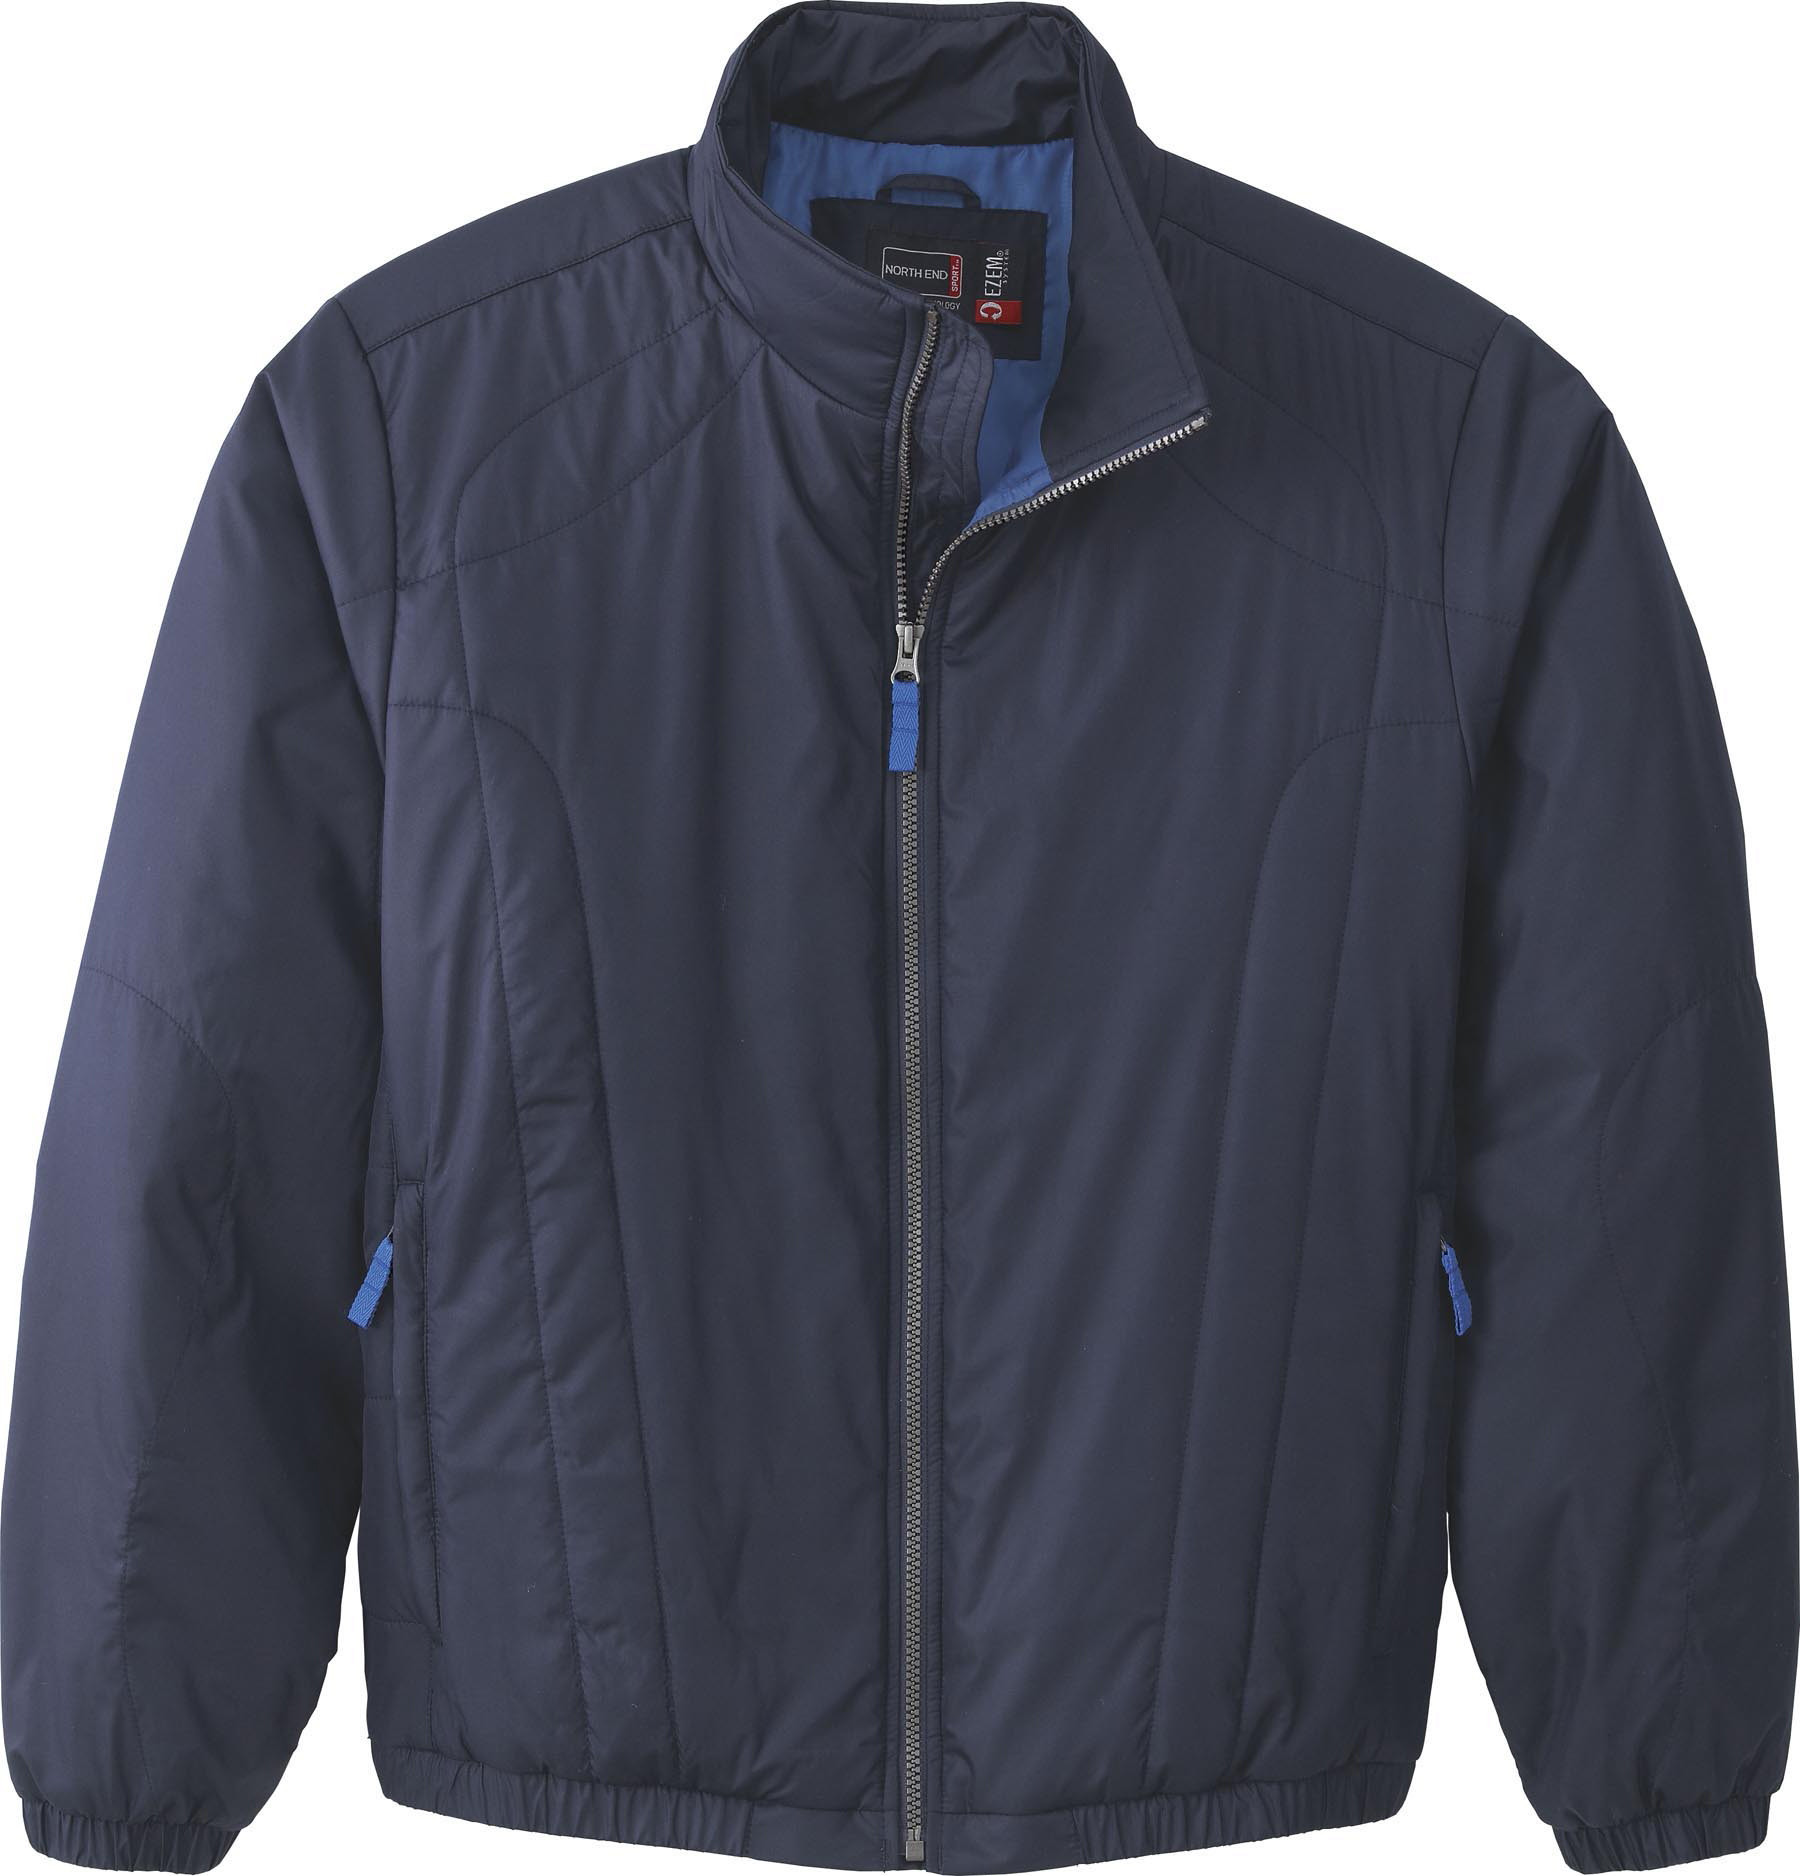 Ash City Insulated 88640 - Men's Insulated High-Count Polyester Jacket